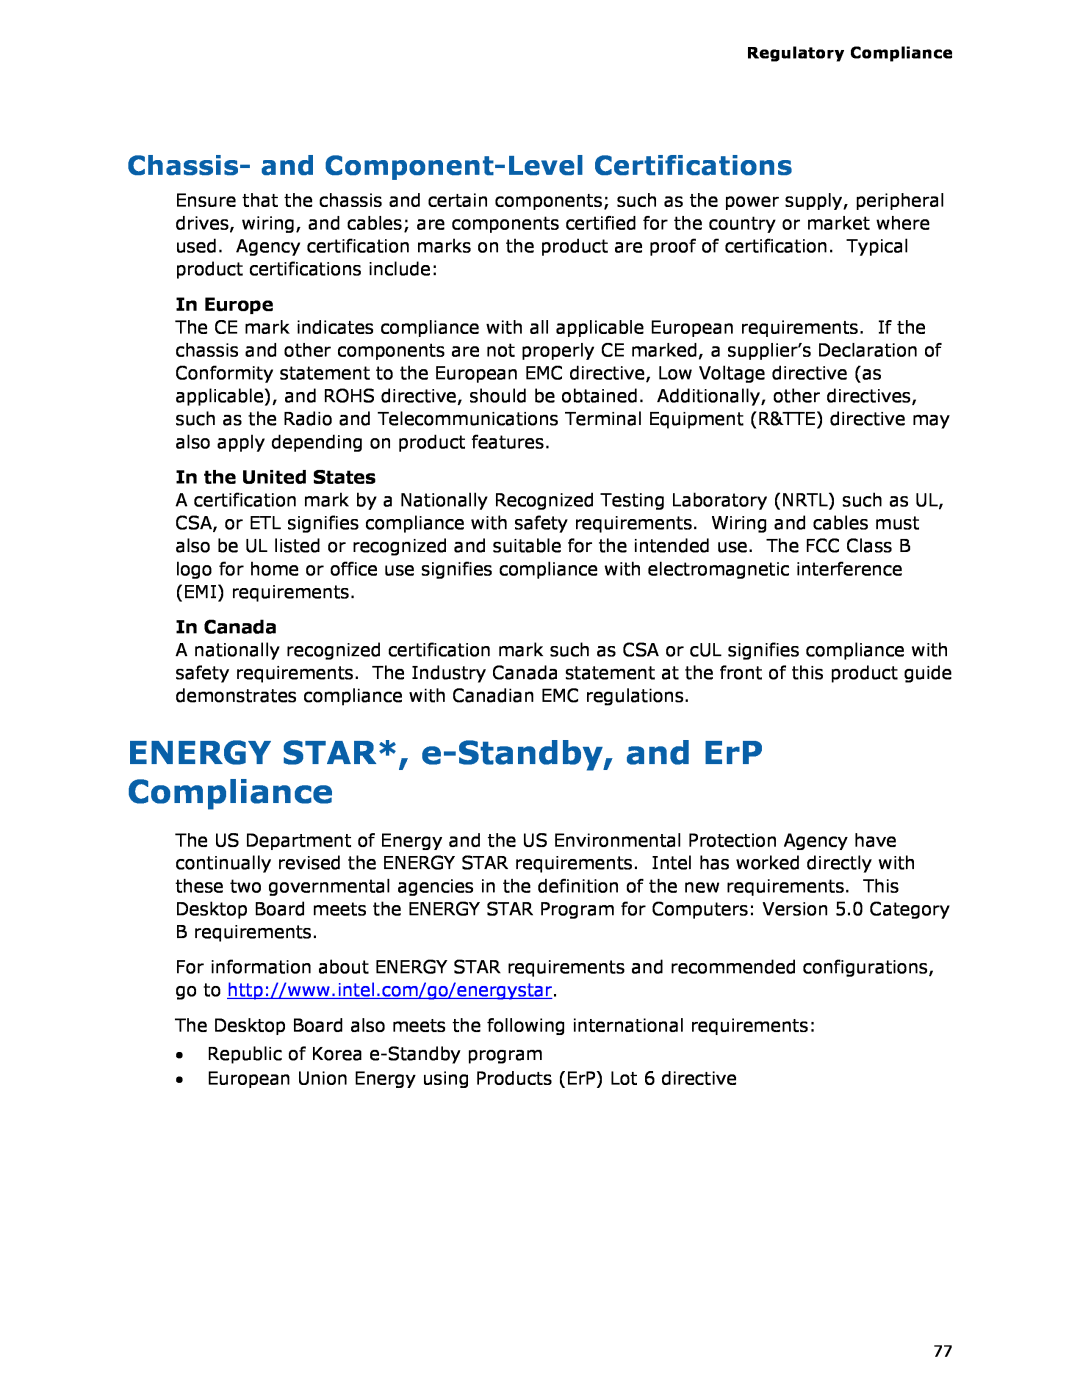 Intel G13841-001 manual ENERGY STAR*, e-Standby, and ErP Compliance, Chassis- and Component-Level Certifications, In Europe 